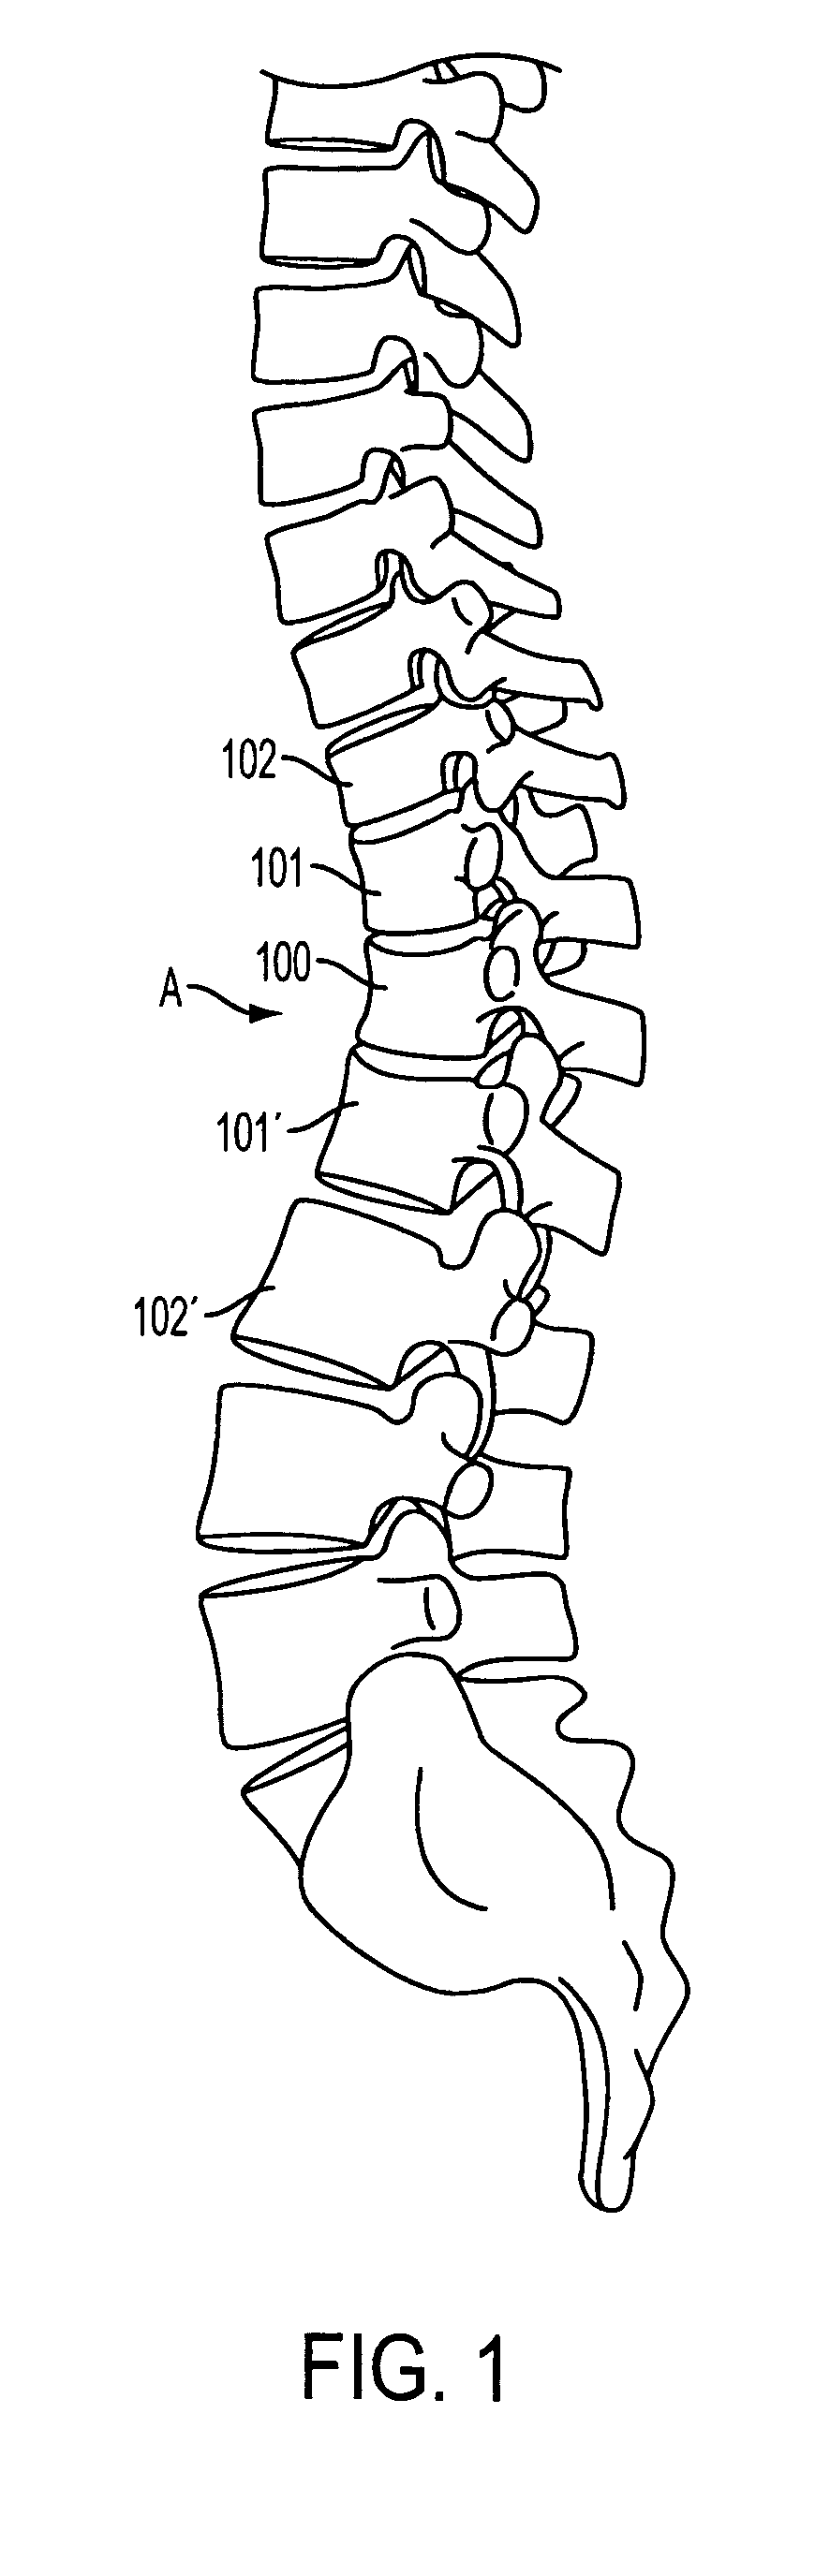 Device and method for dynamic spinal fixation for correction of spinal deformities